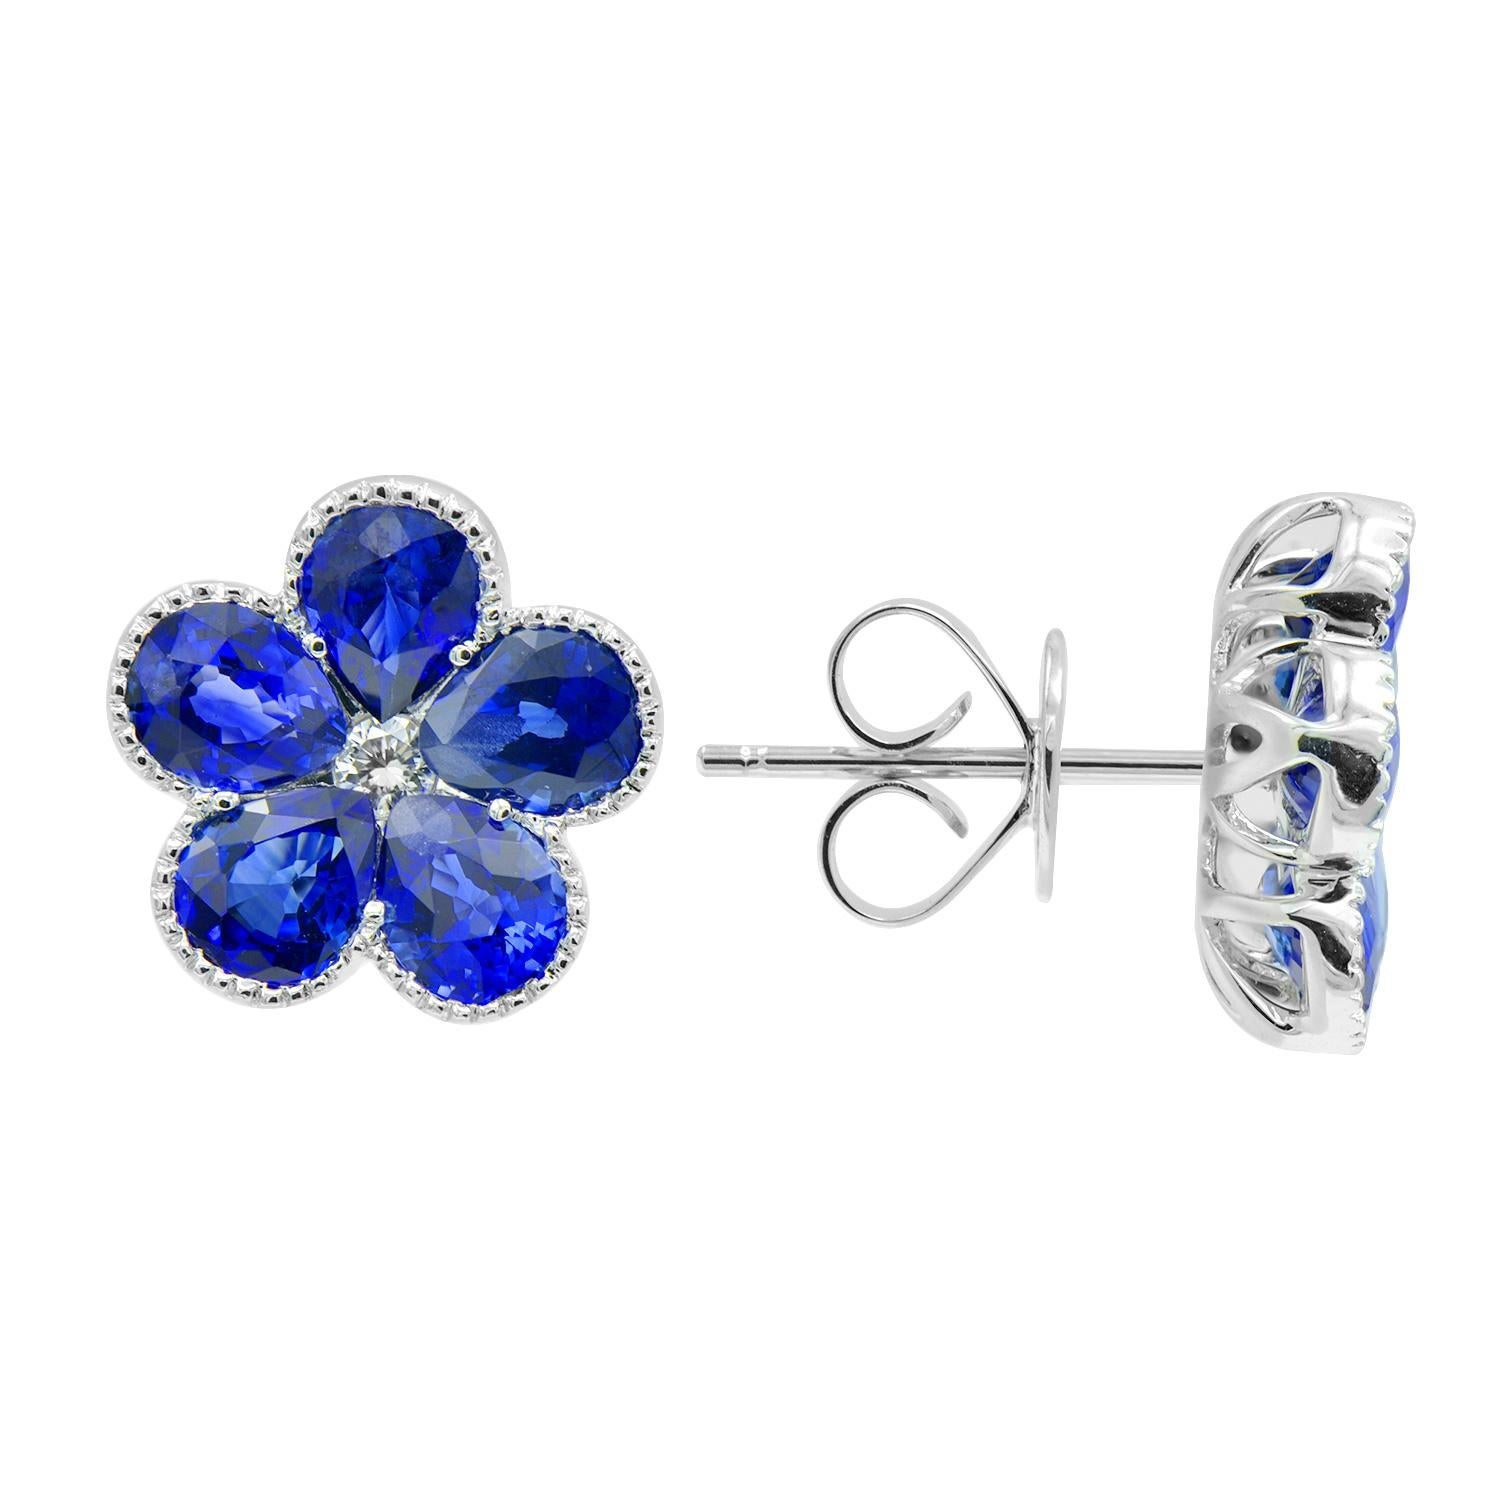 These beautiful earrings are made from 10 pear shaped sapphires perfectly set to look like a flower with a diamond for the center. The sapphires total 3.68 carats with 0.07 carats for the diamonds in the center. The stones are set in 2.6 grams of 18